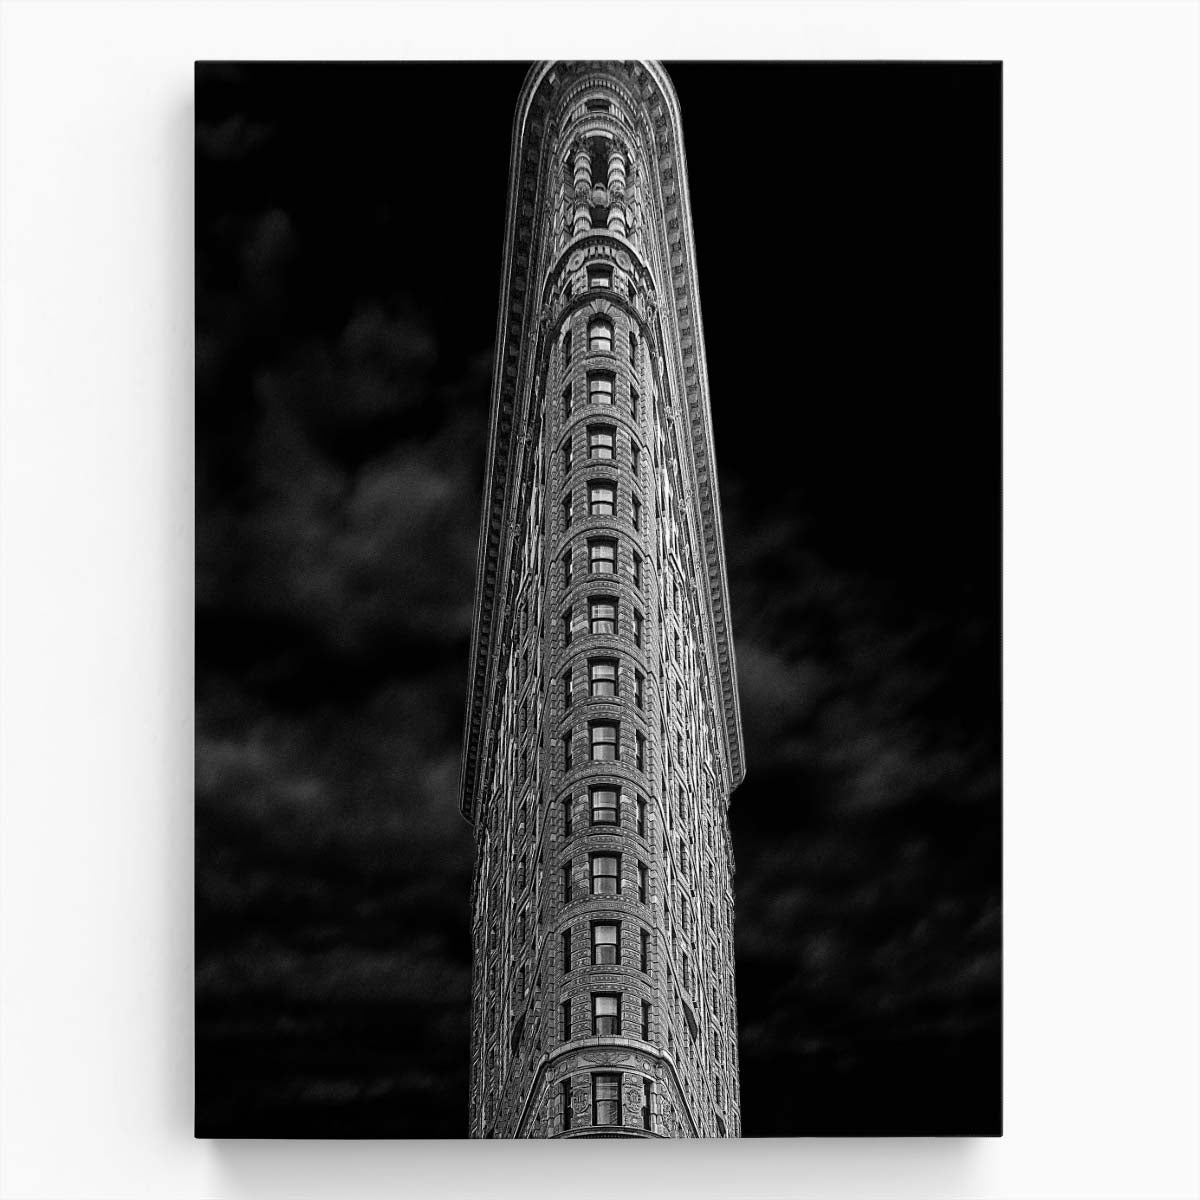 Black and White Flatiron Building Photography, Iconic NYC Landmark Wall Art by Luxuriance Designs, made in USA